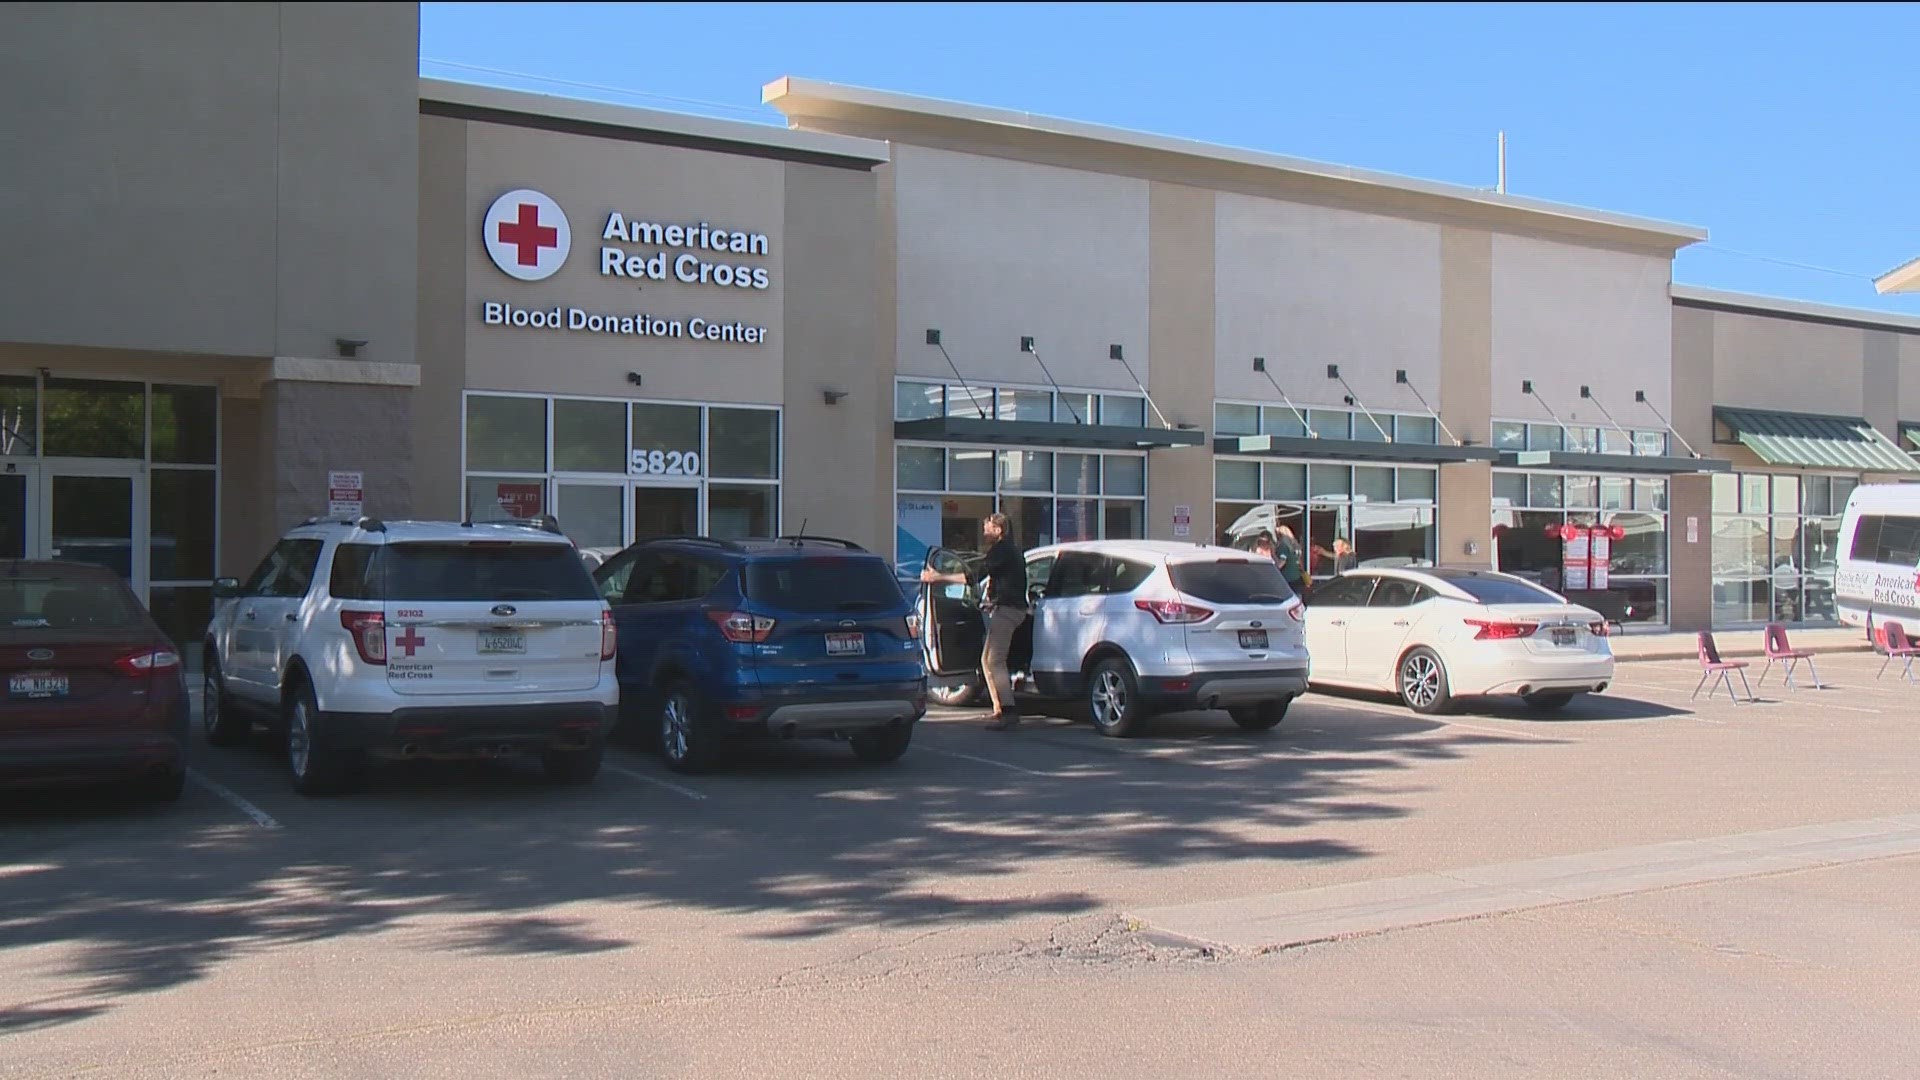 The Nampa facility adds capacity and makes giving a life-saving gift easier for people in the Treasure Valley who want to donate blood.